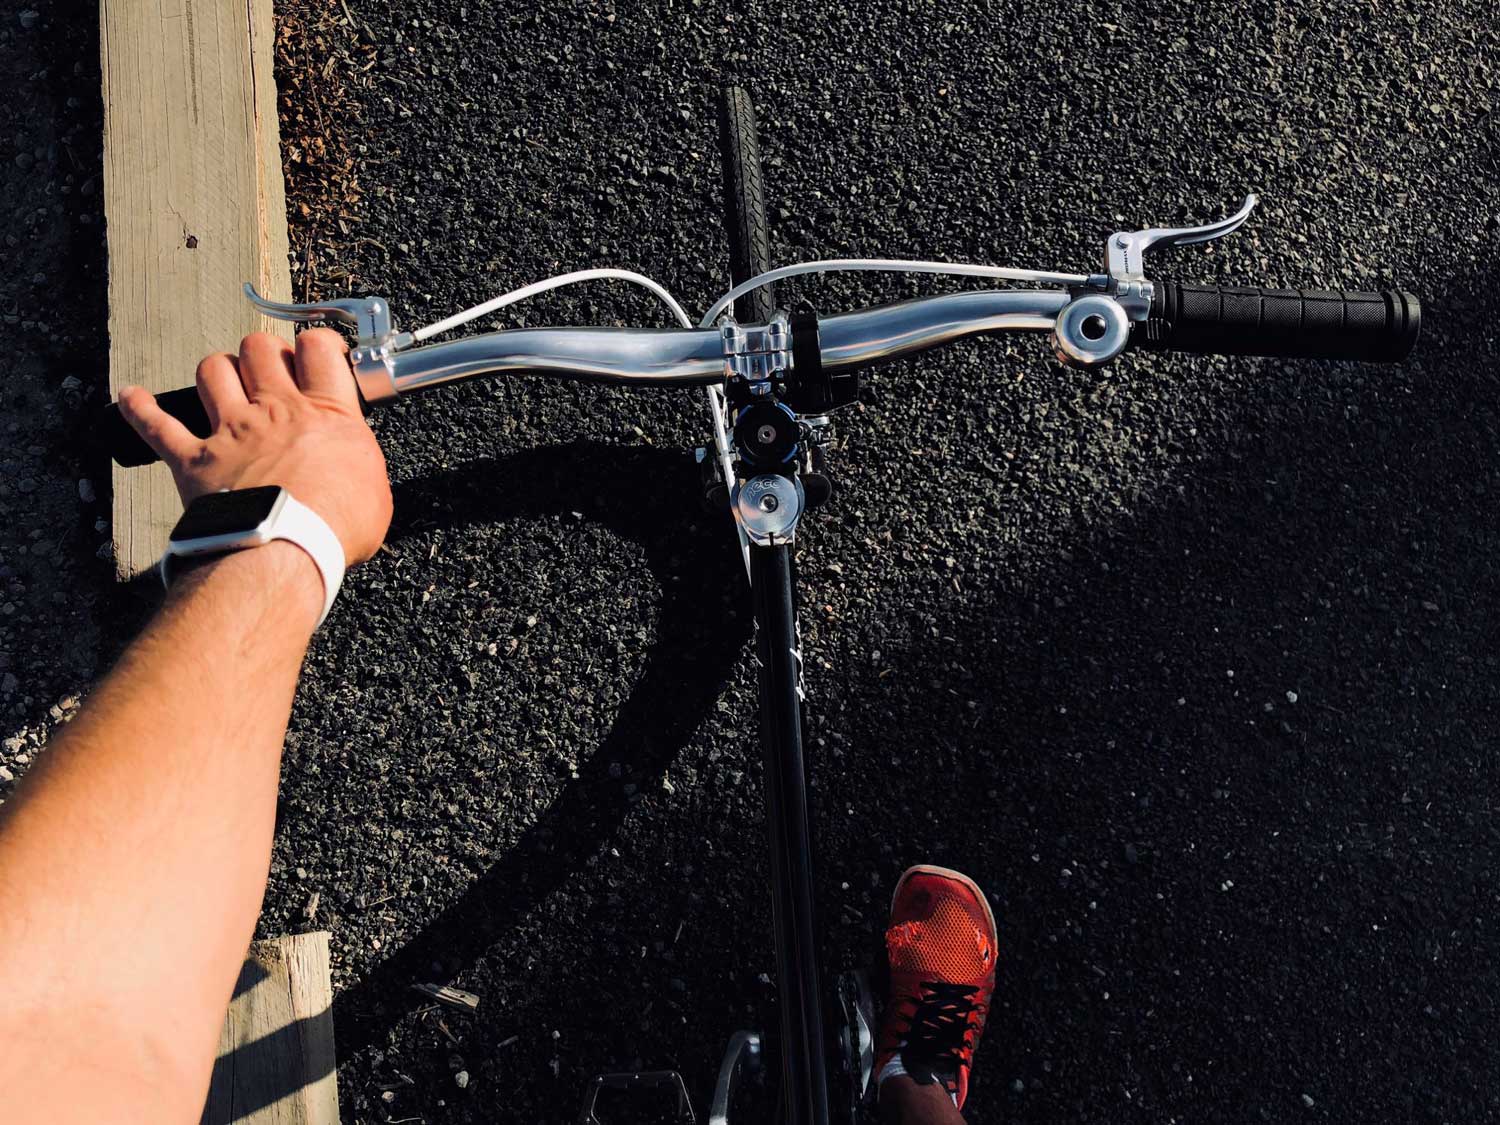 Cycling with Apple Watch Series 3 Cellular